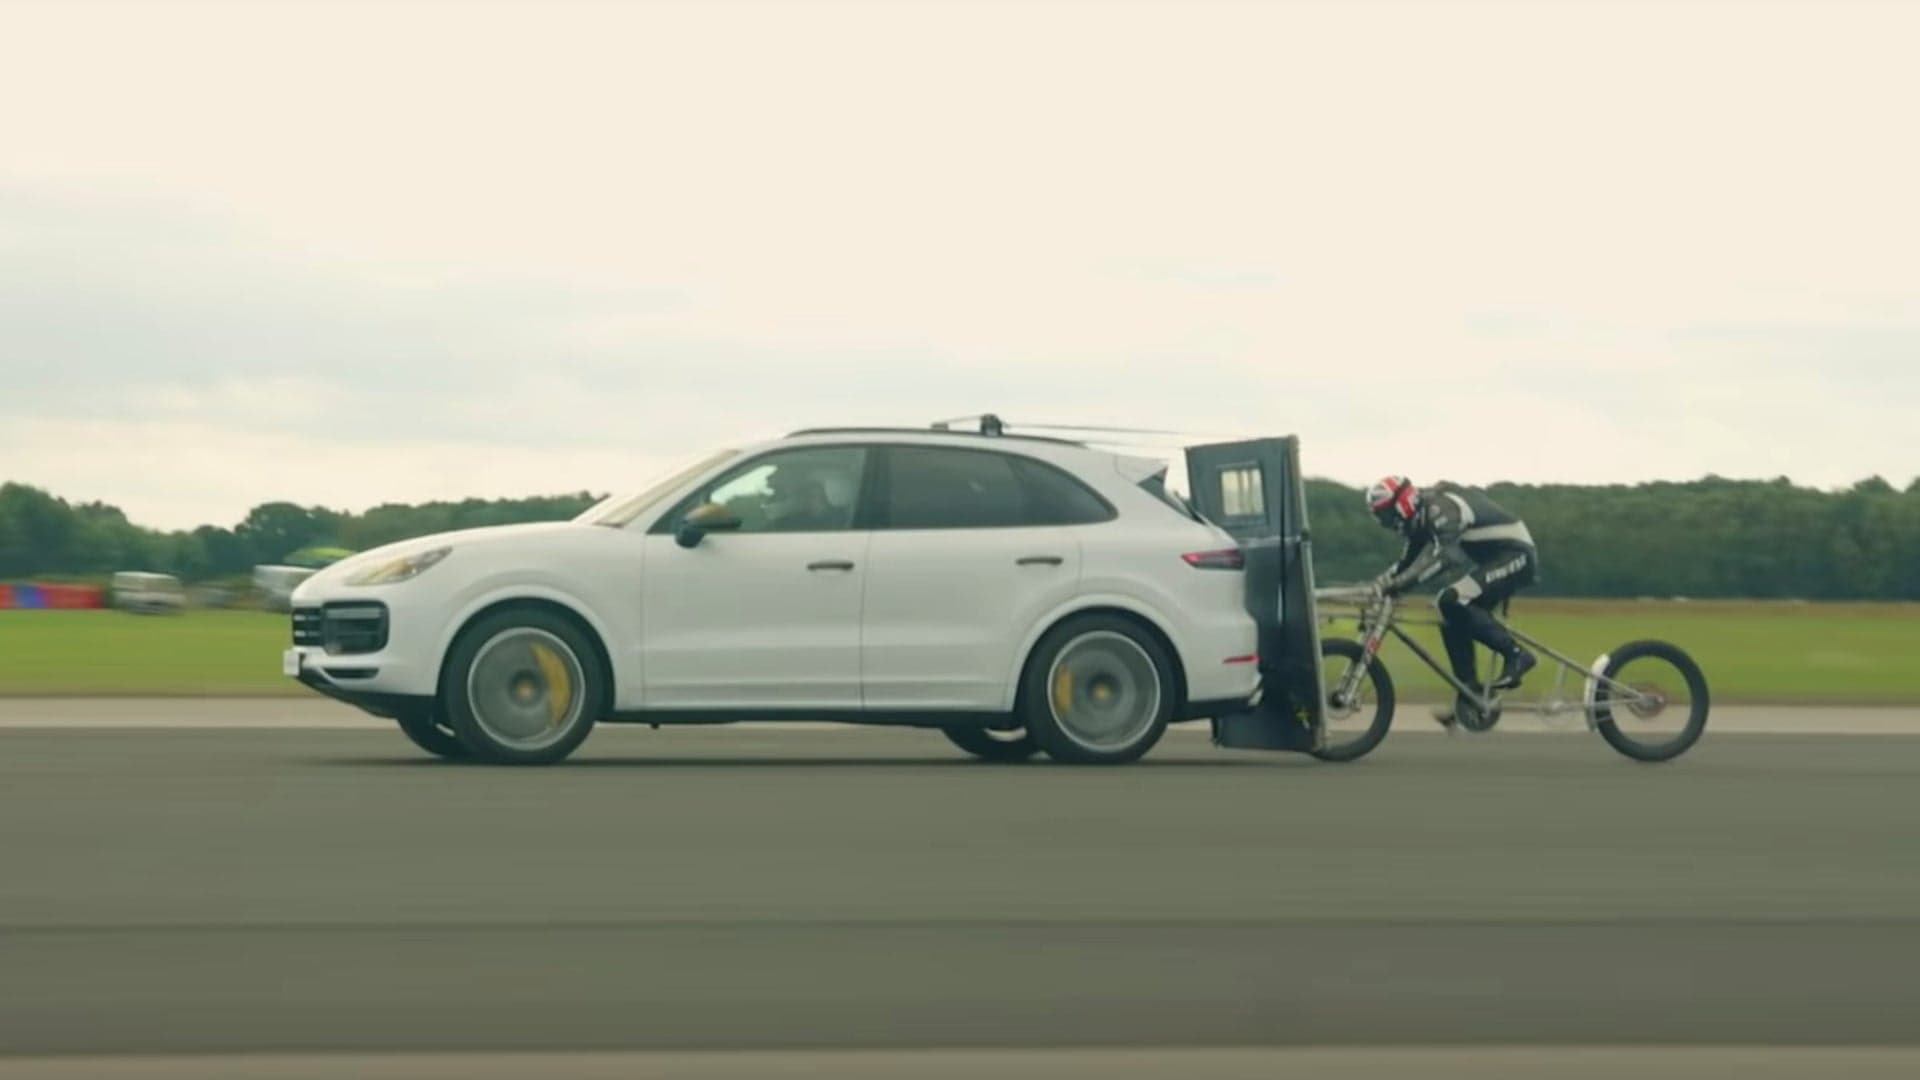 Cyclist Breaks Bicycle Speed Record Slipstreaming a Porsche Cayenne Turbo